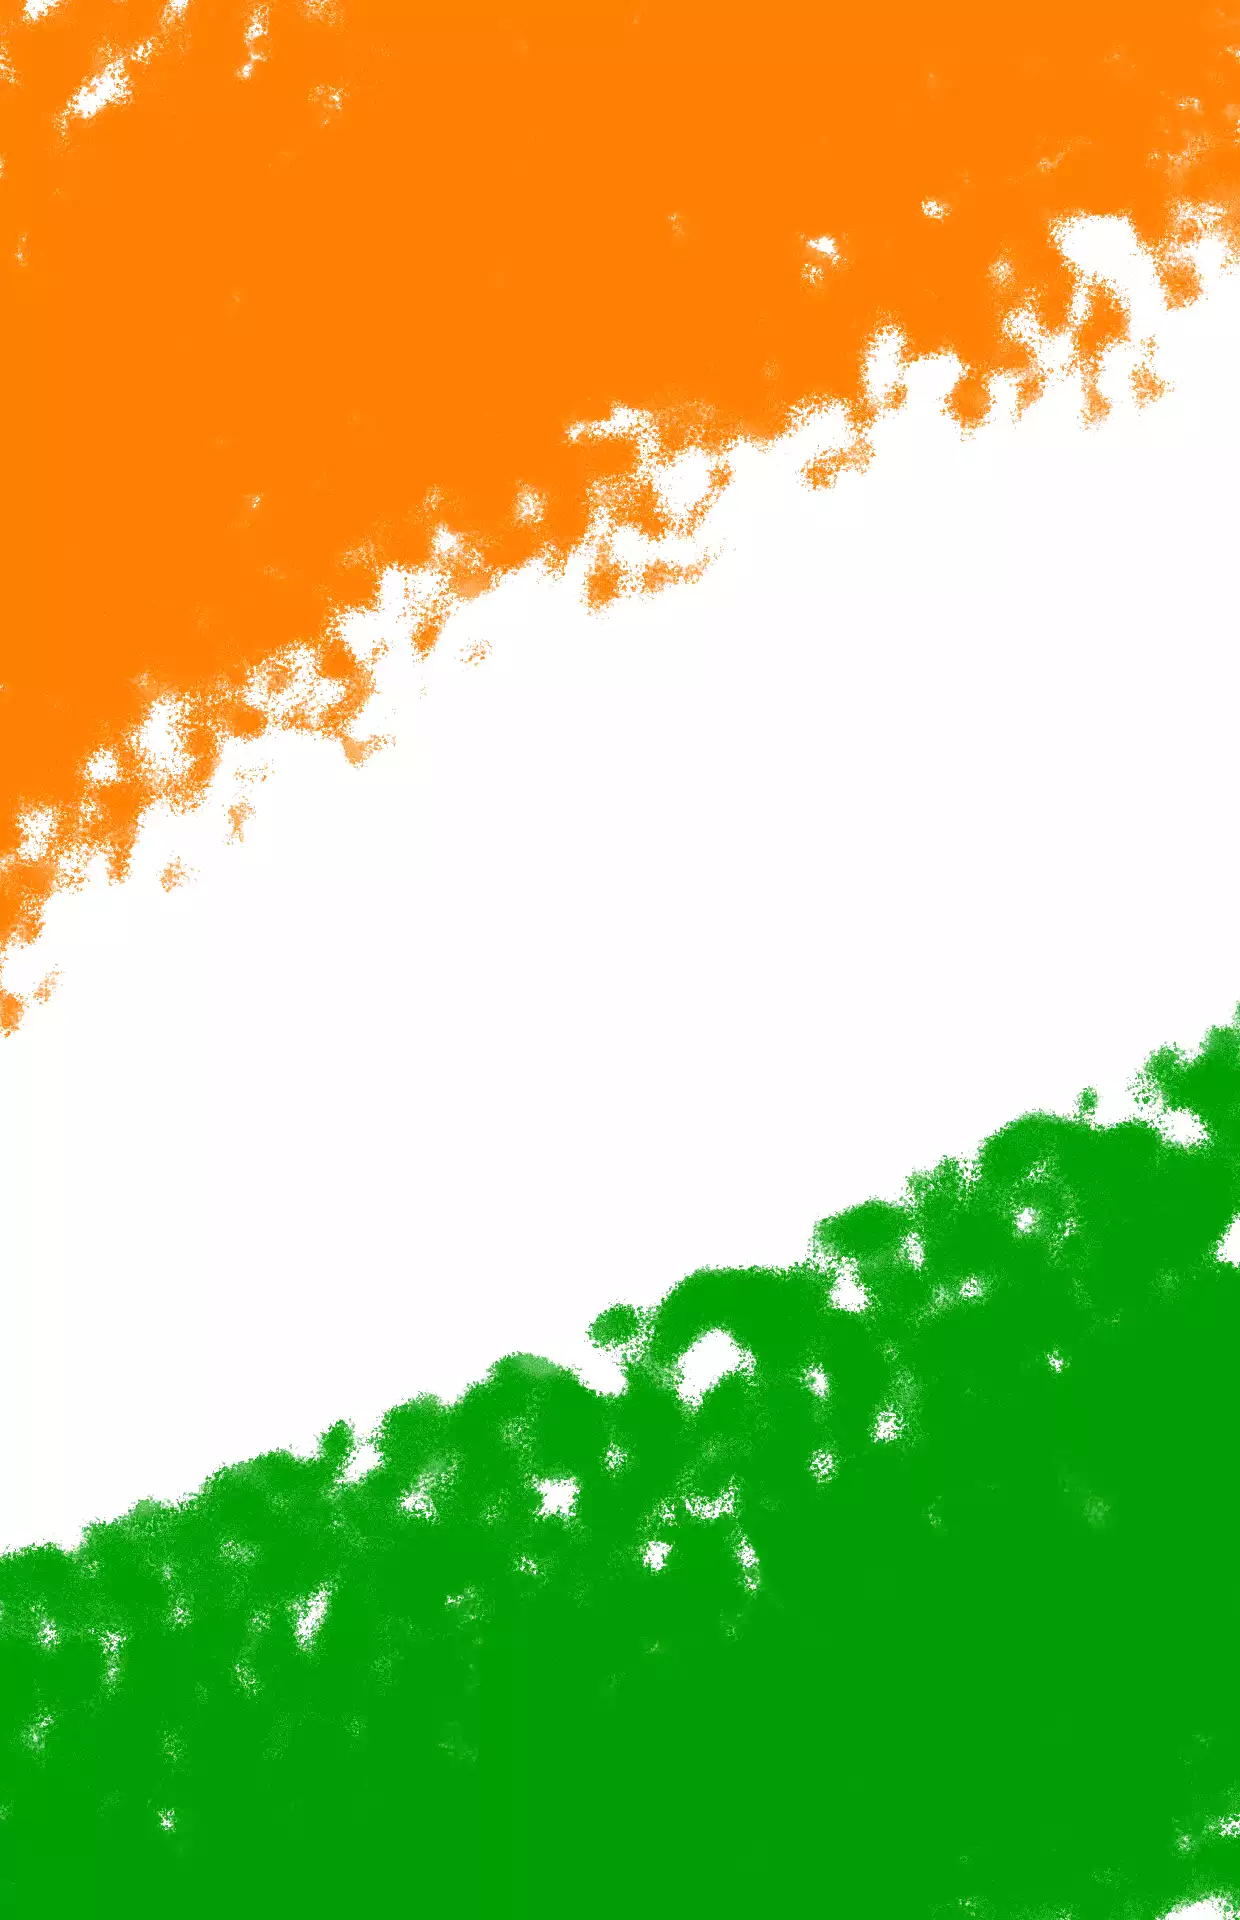 Indian flag HD wallpapers  Pxfuel